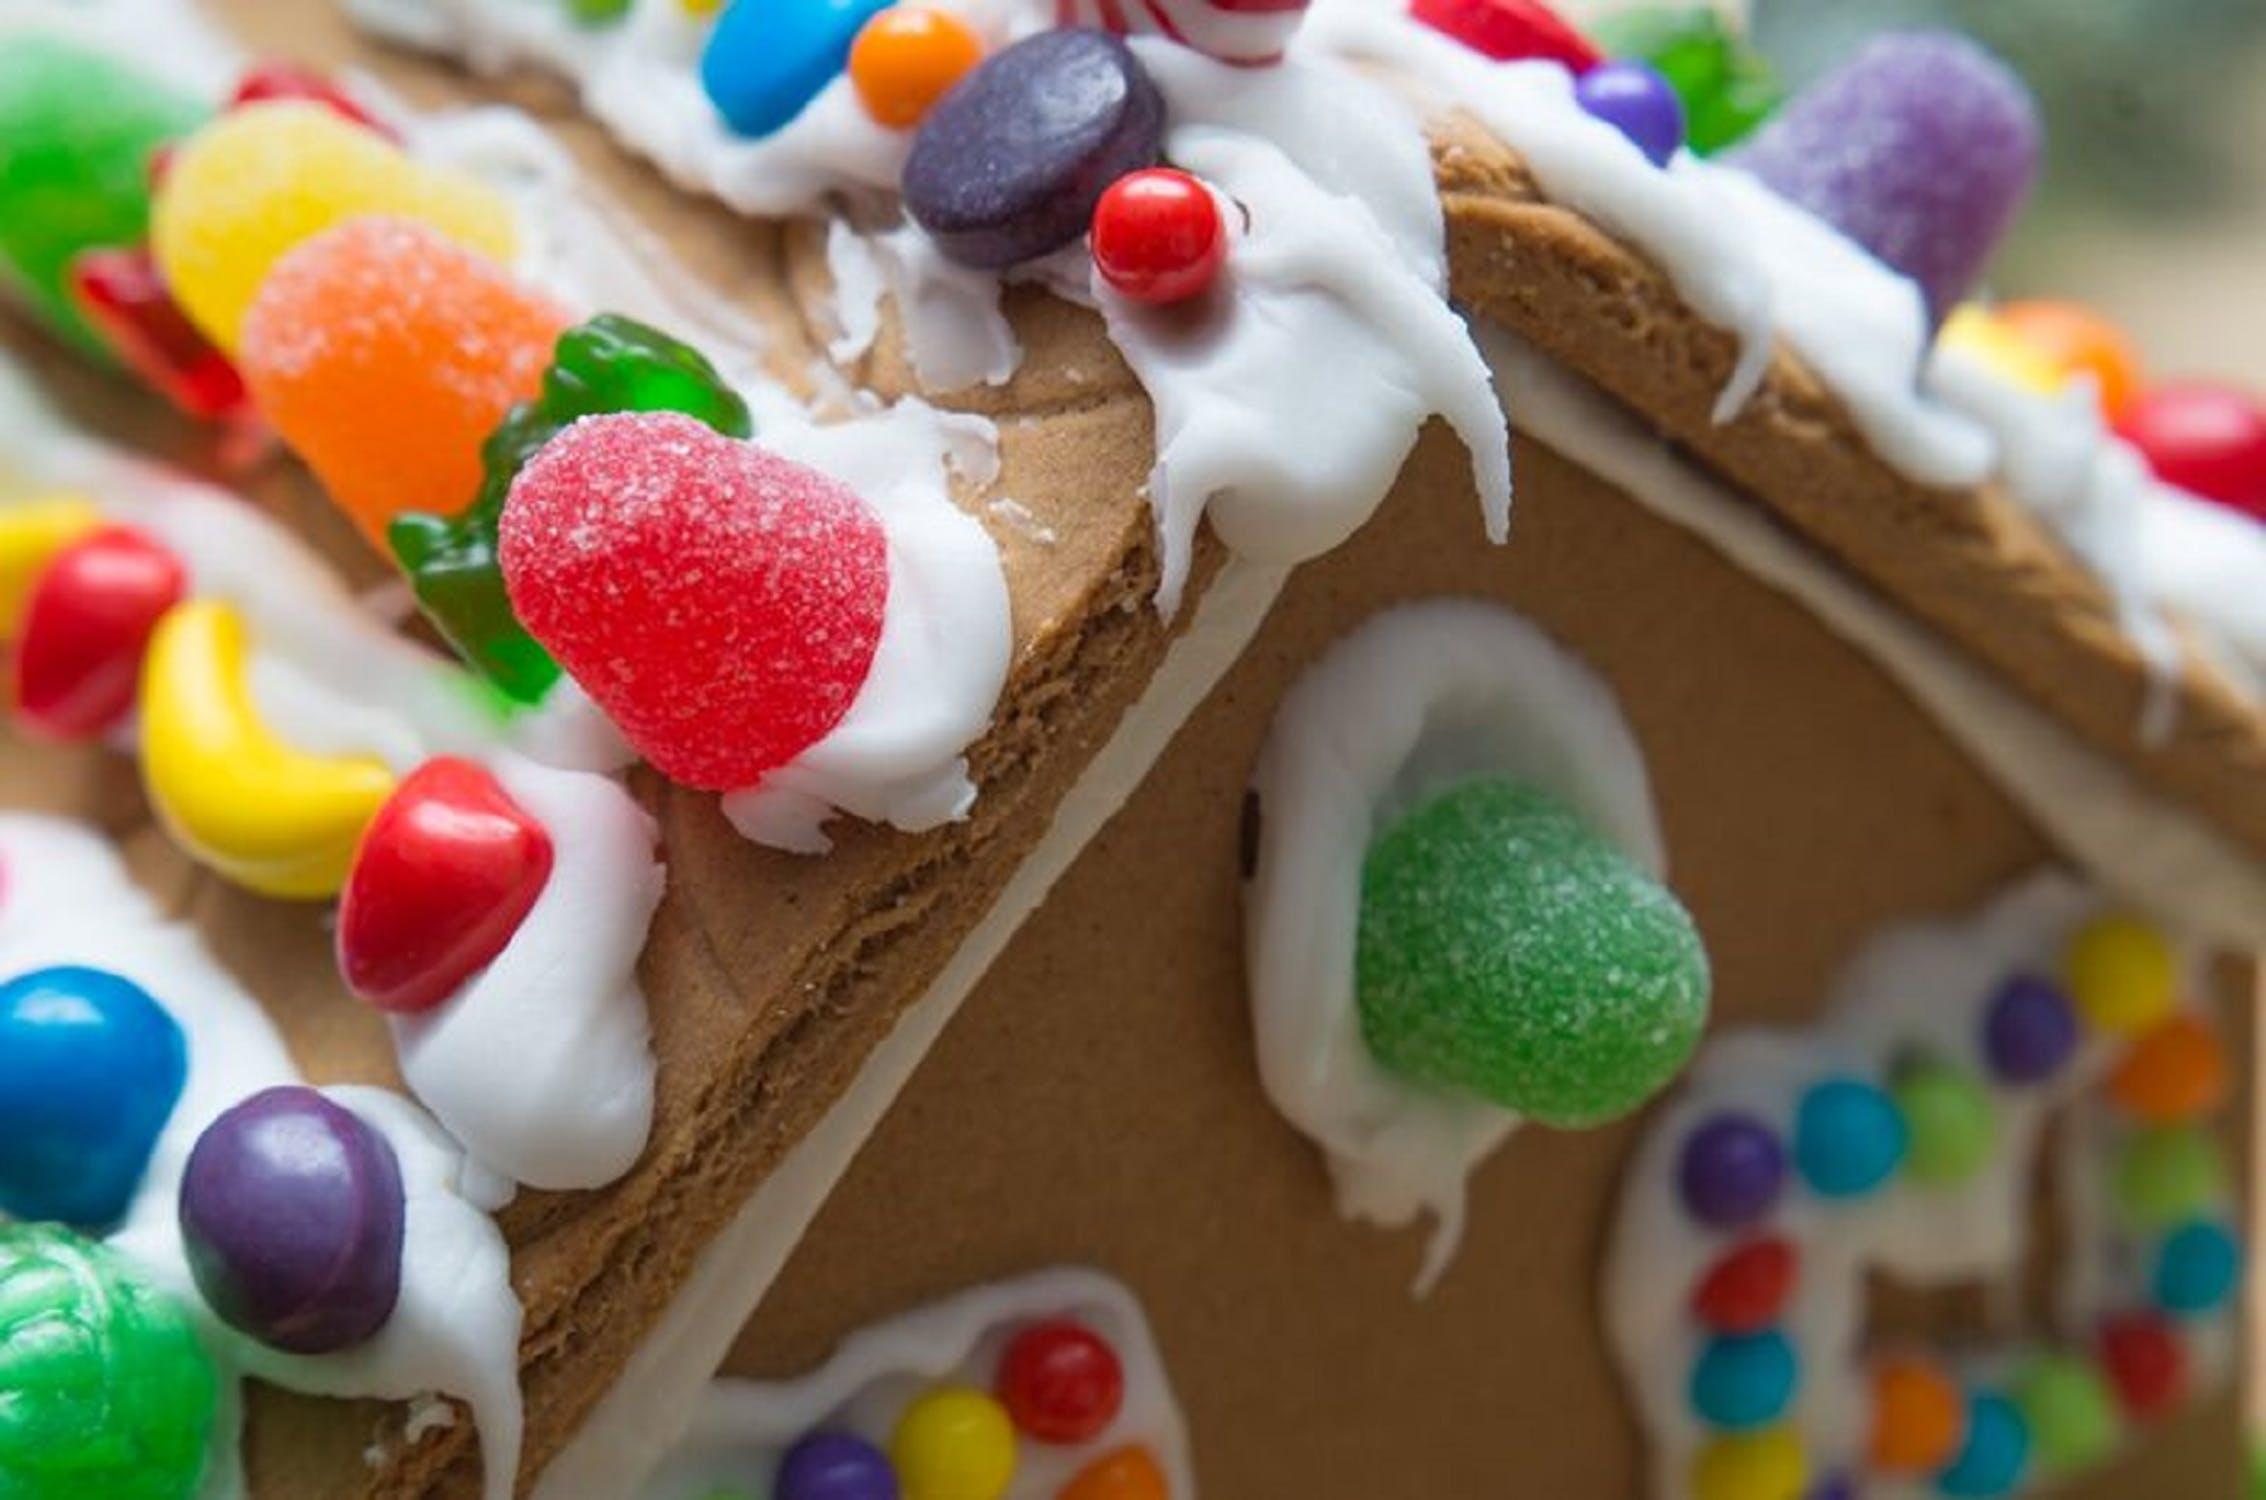 Make Your Own Gingerbread House - Dapto Library